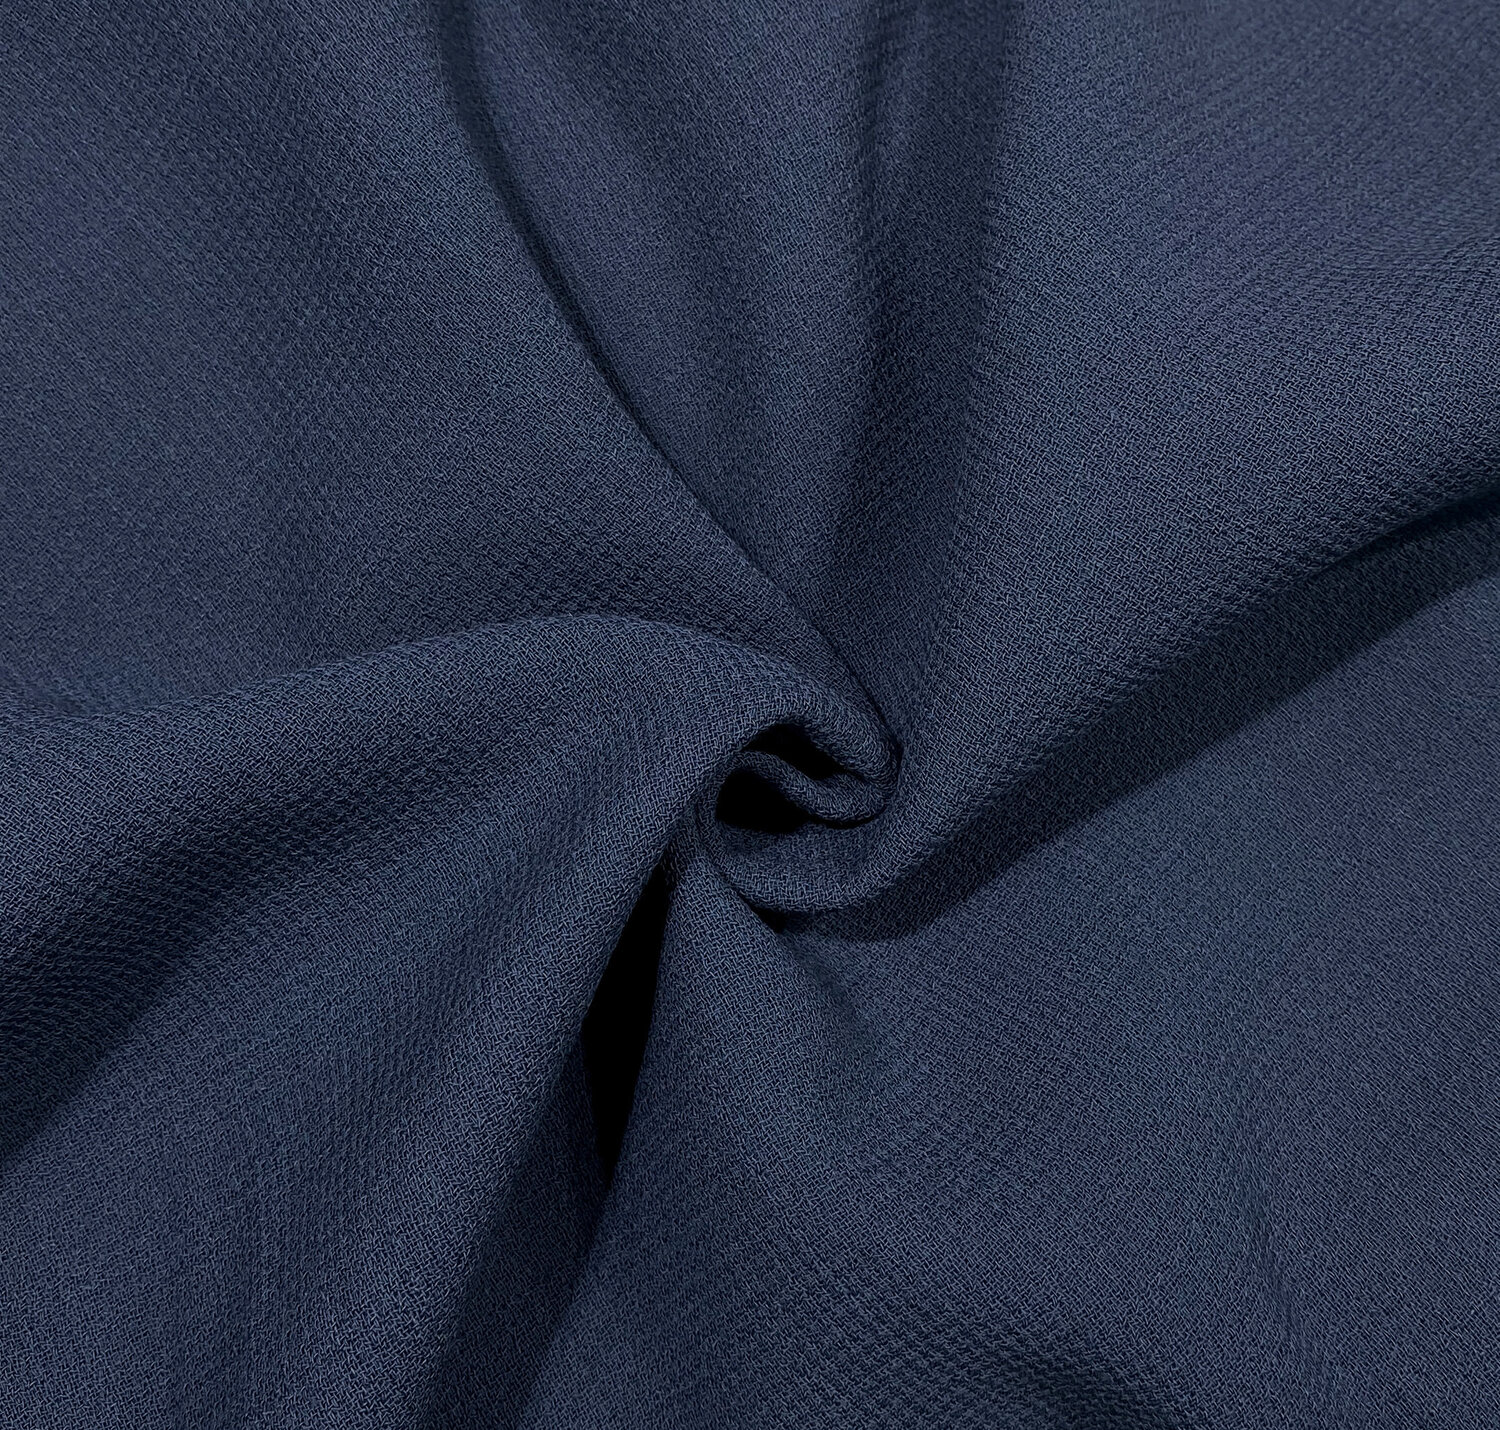 Crepe Paper - Double Sided Navy Blue and Light Grey-100 mm - 12 sheets